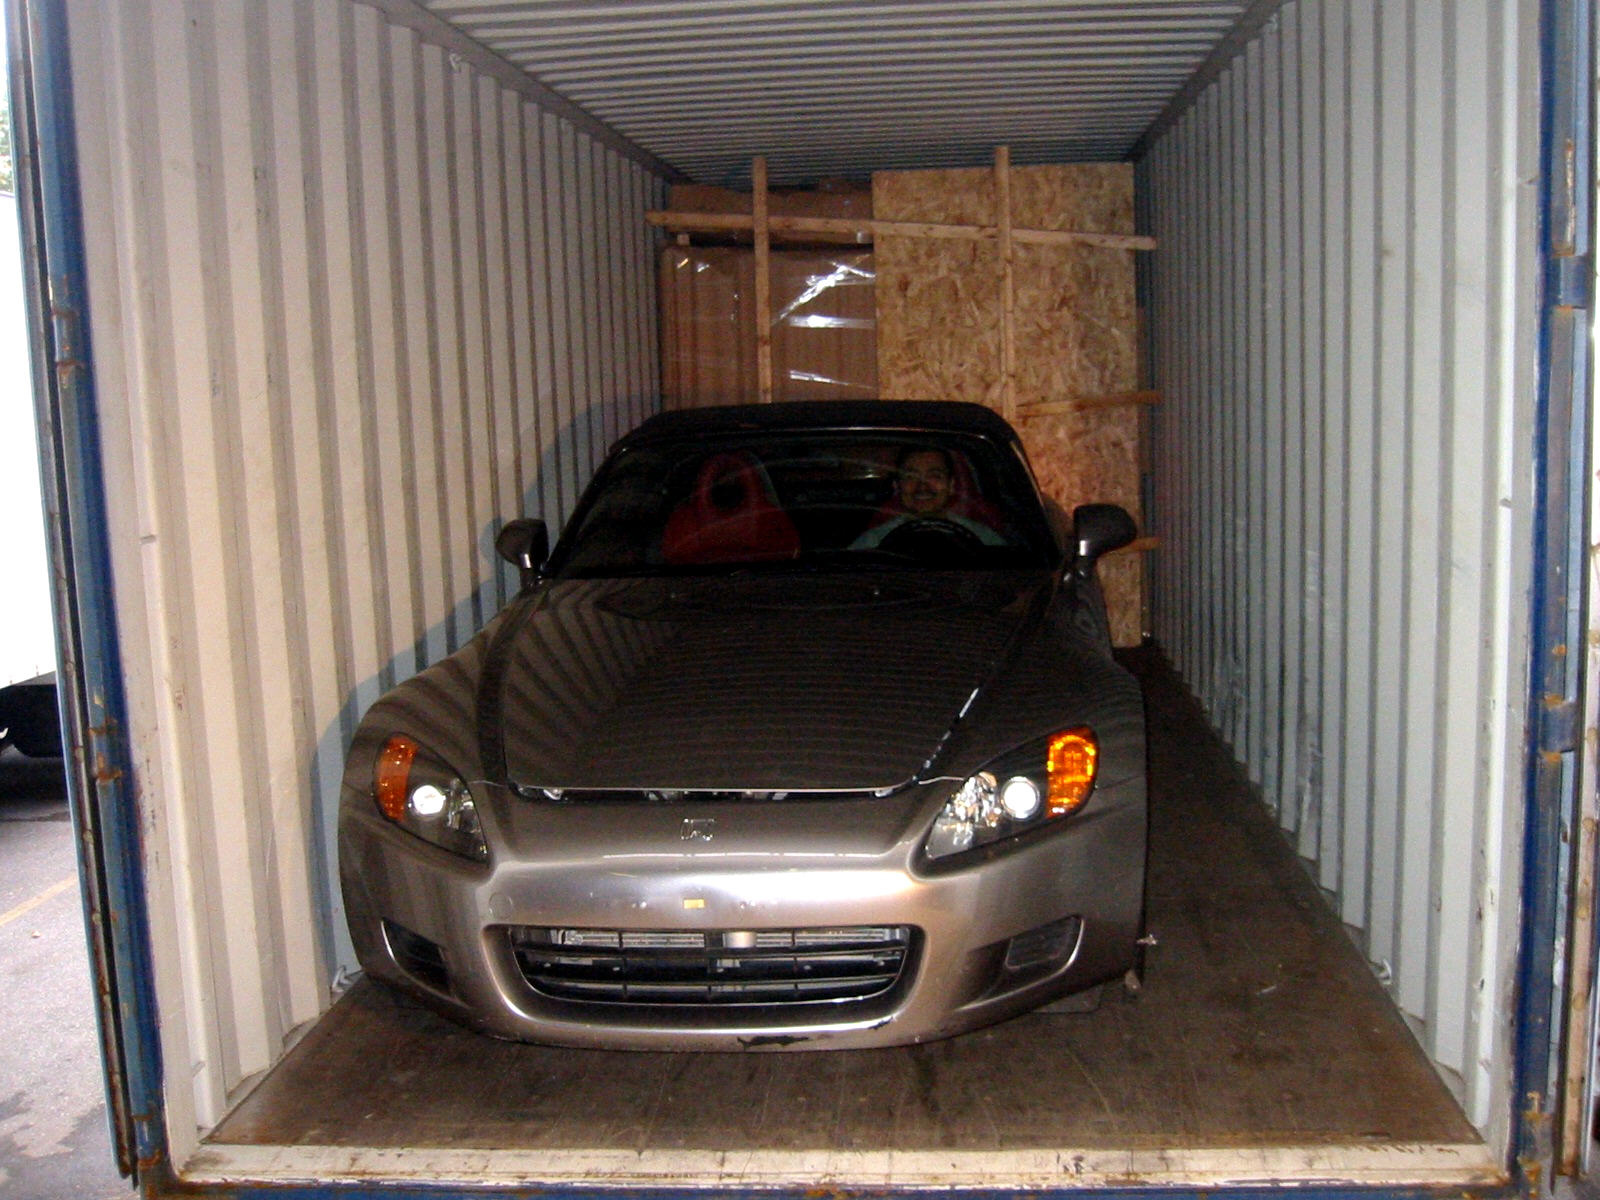 moving your car